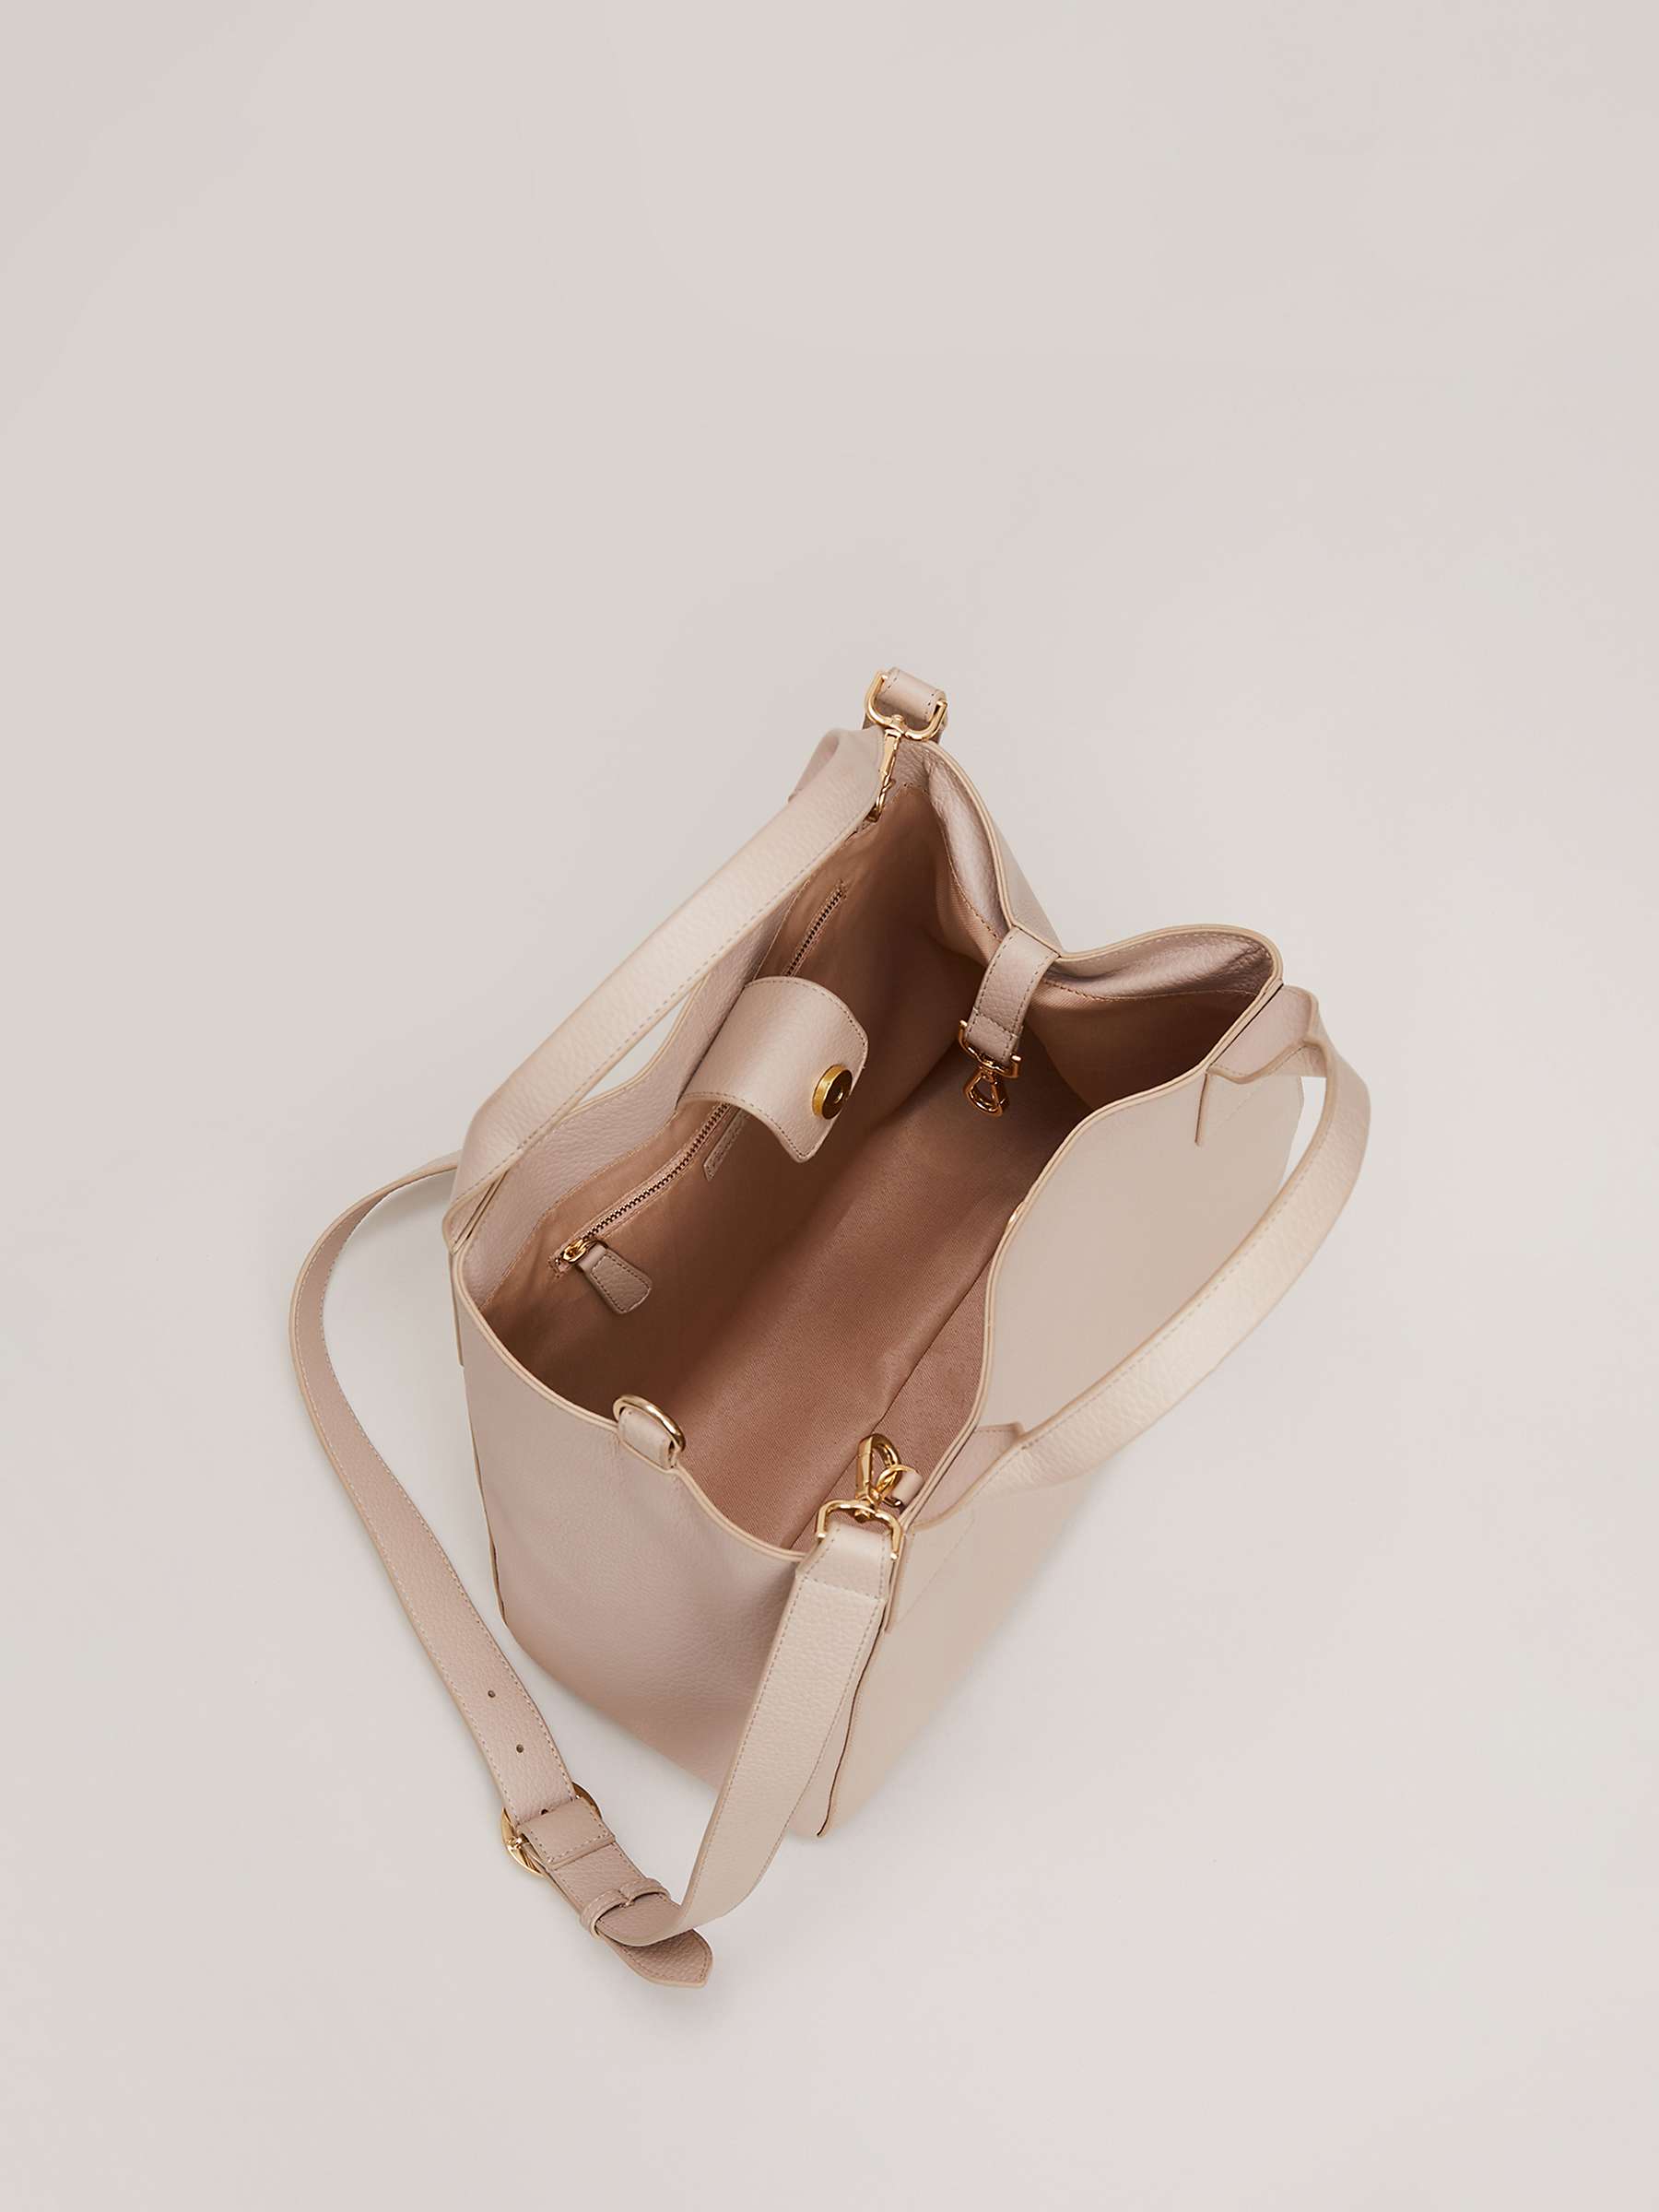 Buy Phase Eight Leather Tote Bag, Neutral Online at johnlewis.com